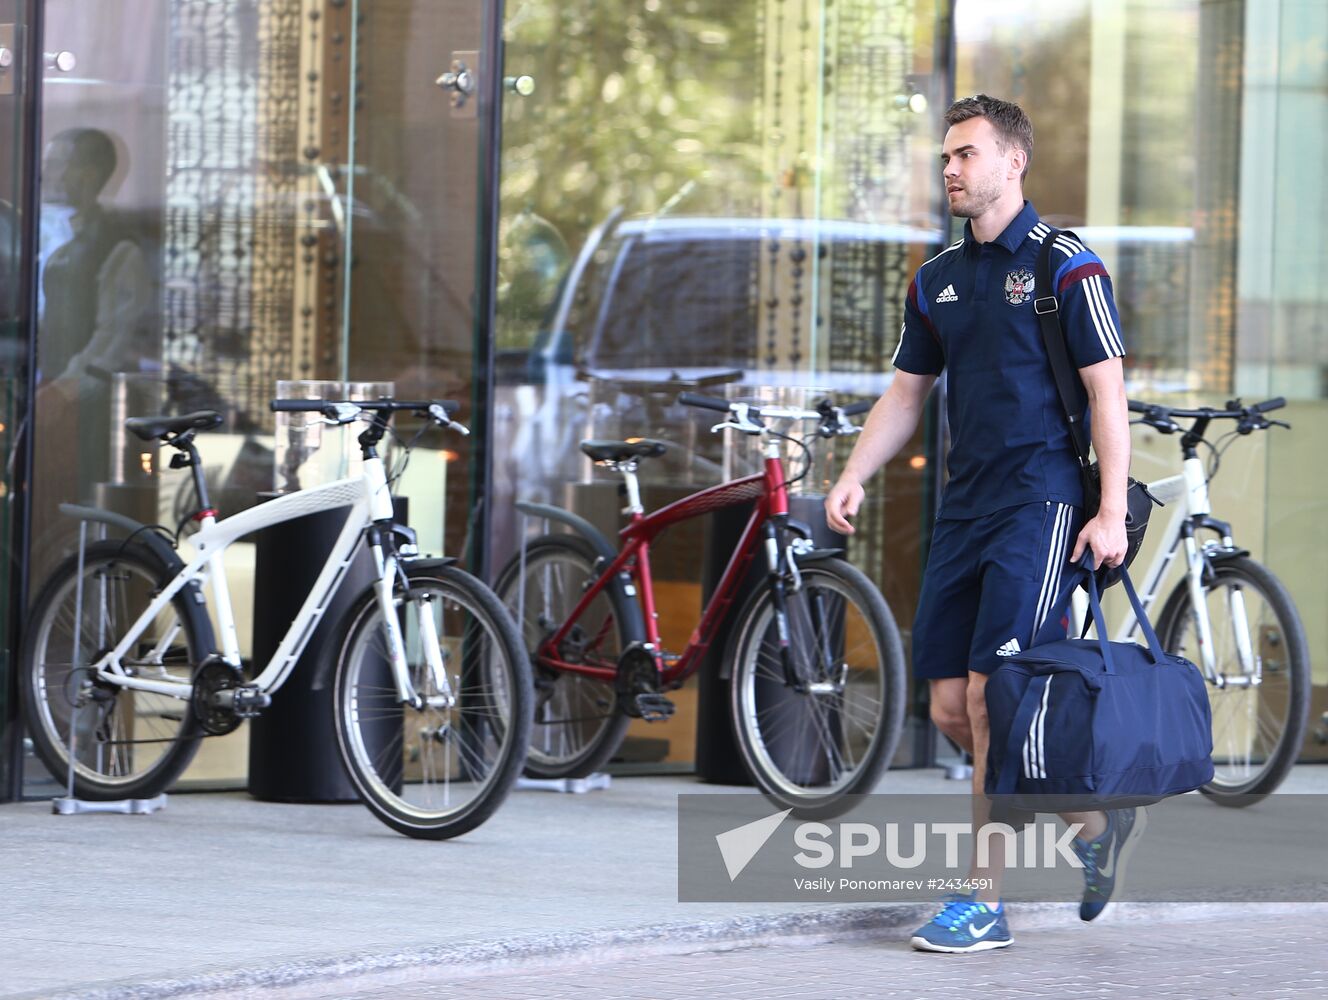 Russian national football team arrives in Moscow for training sessions